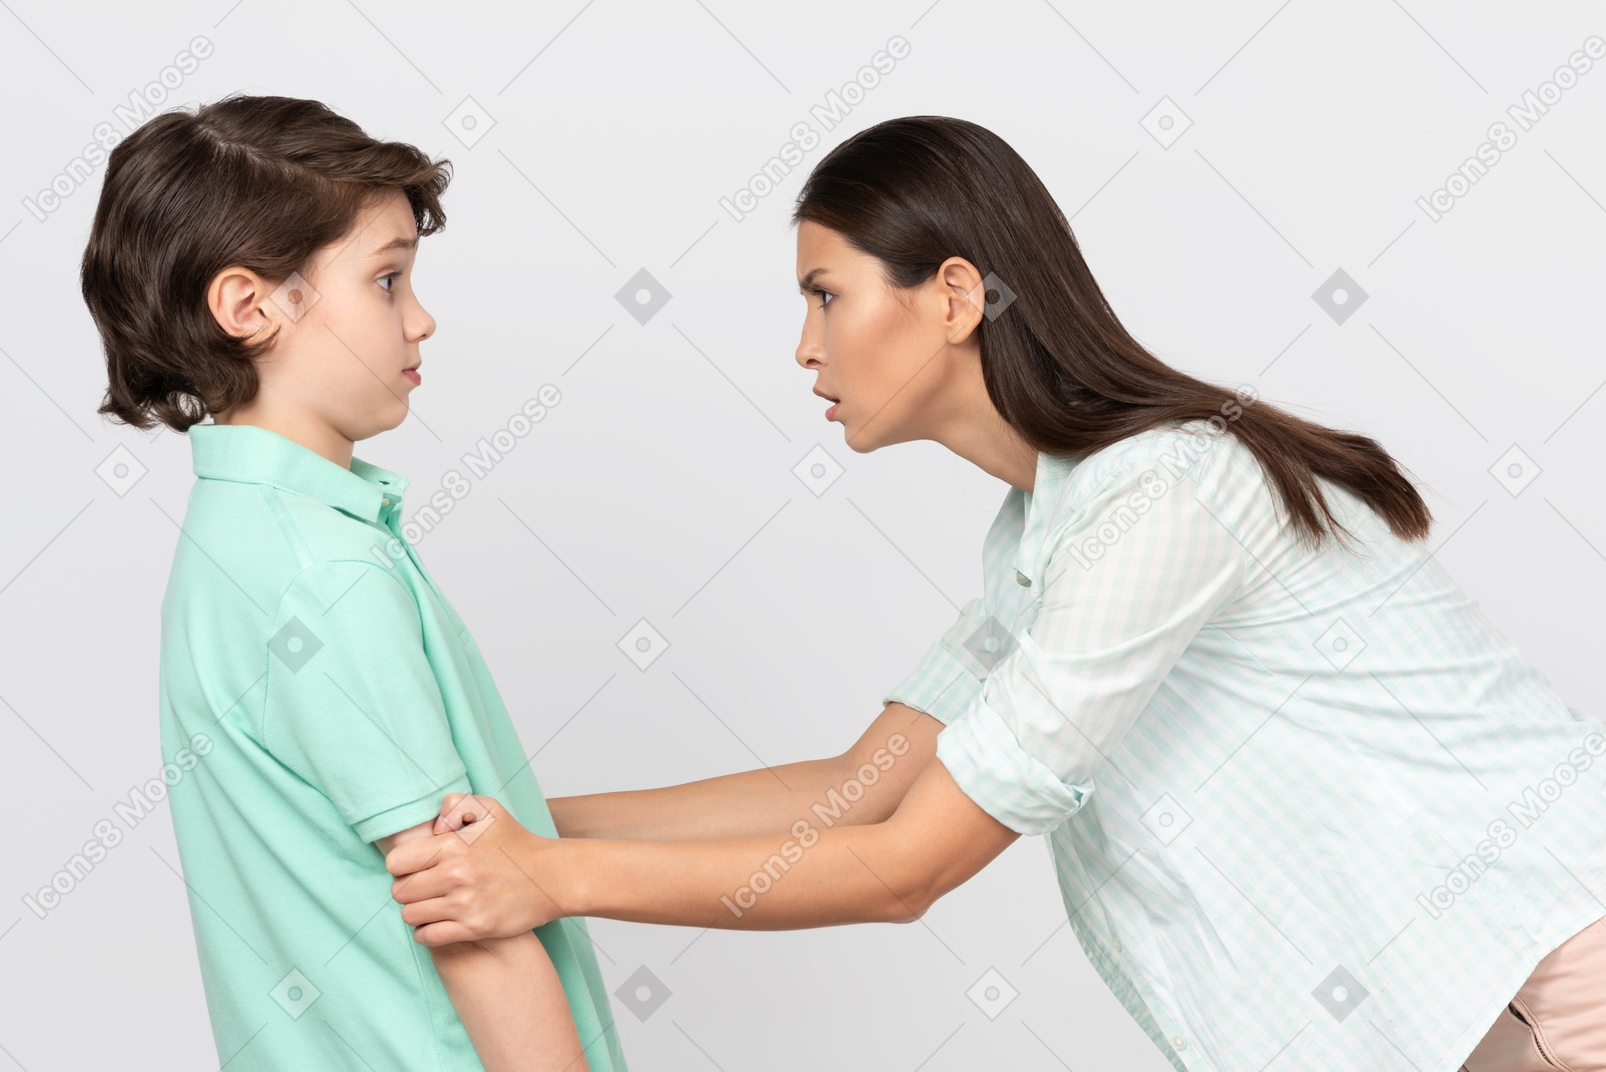 Angry mother grabbing her son's arms